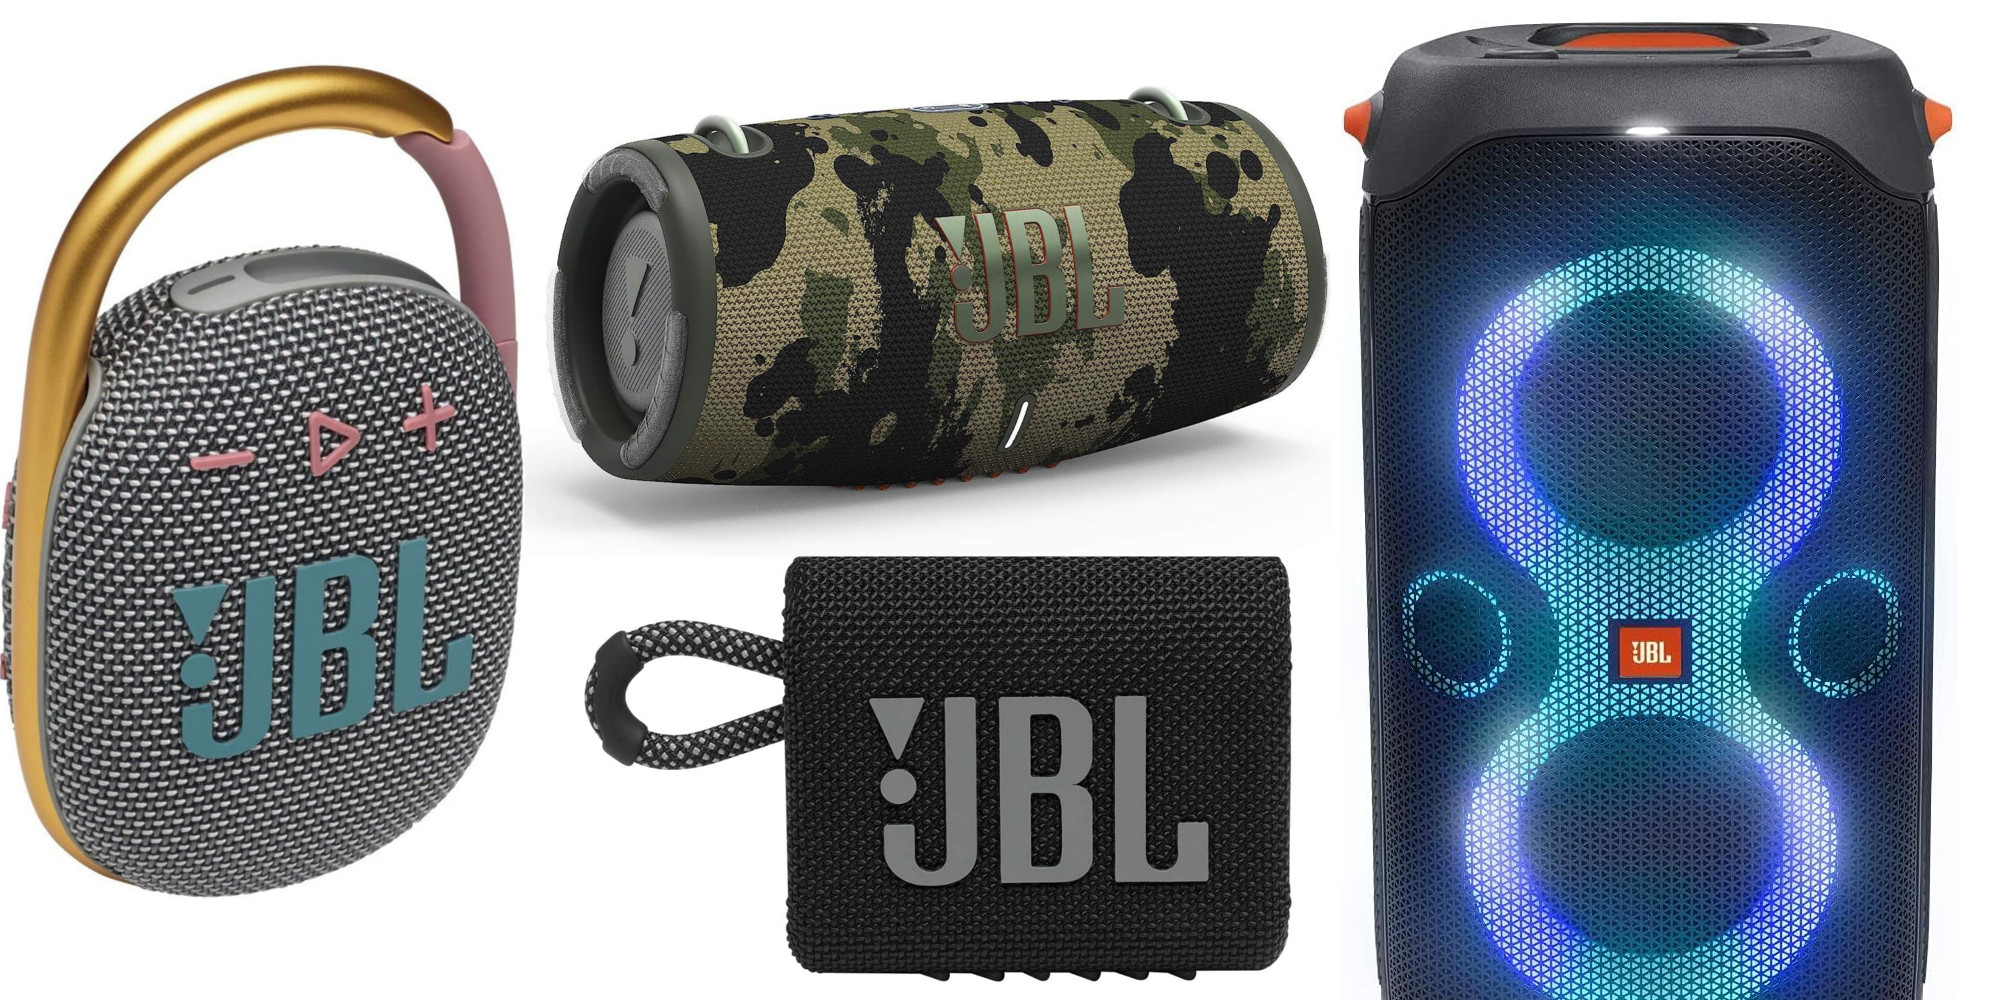 JBL Clip 4 vs JBL Go 3, One Of These Should Not Exist Anymore